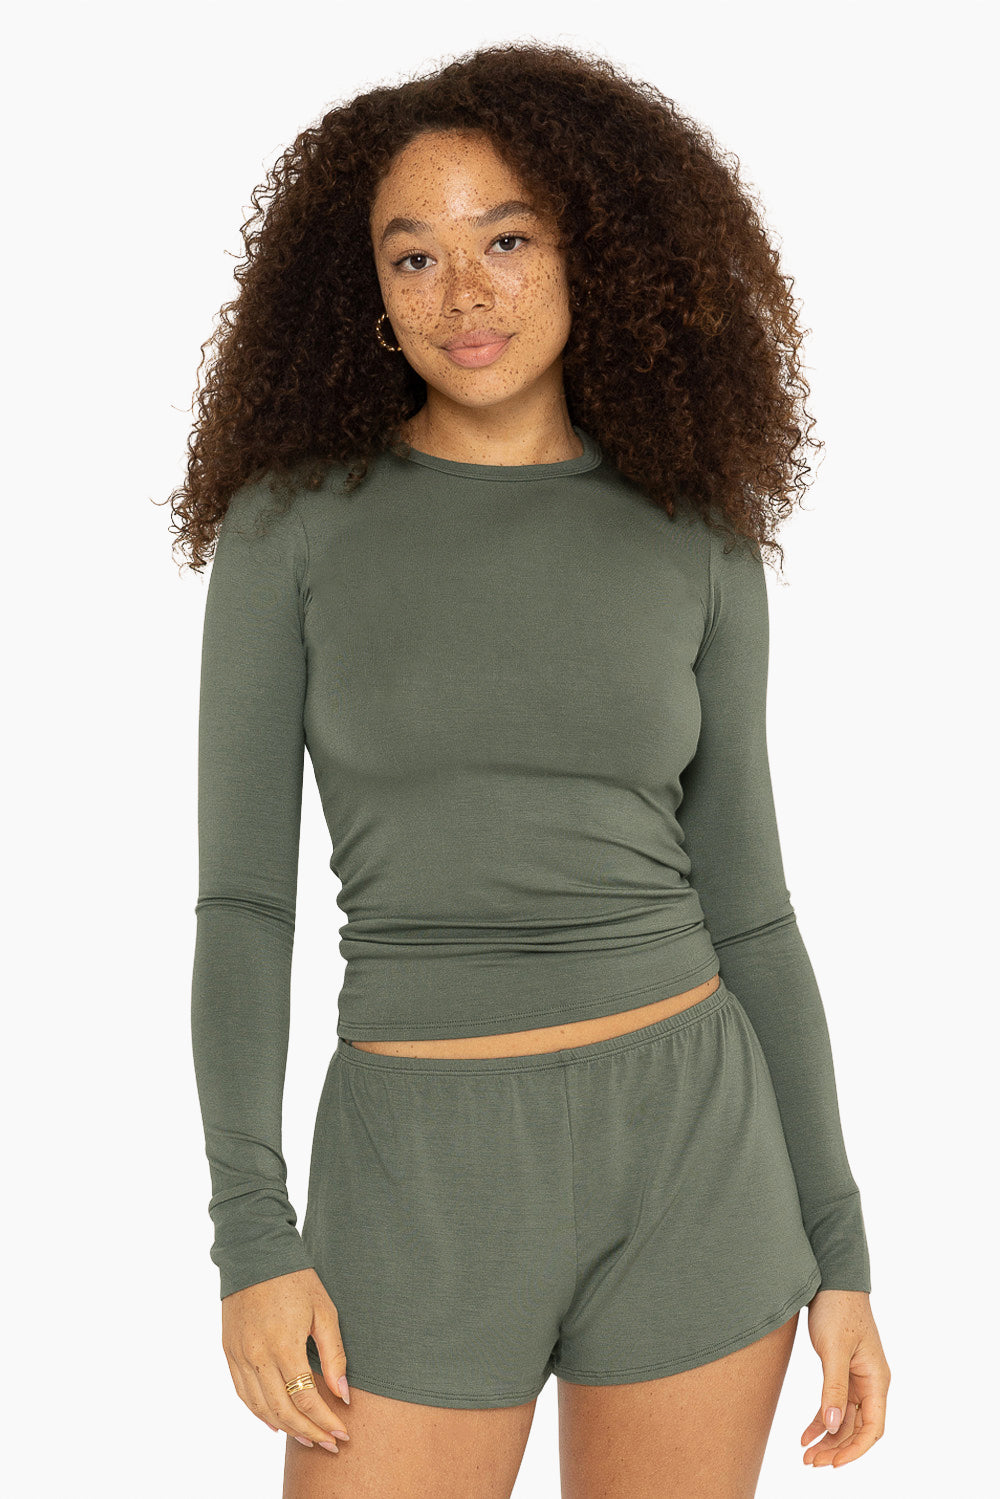 SLEEP JERSEY FITTED LONG SLEEVE - BASIL Featured Image